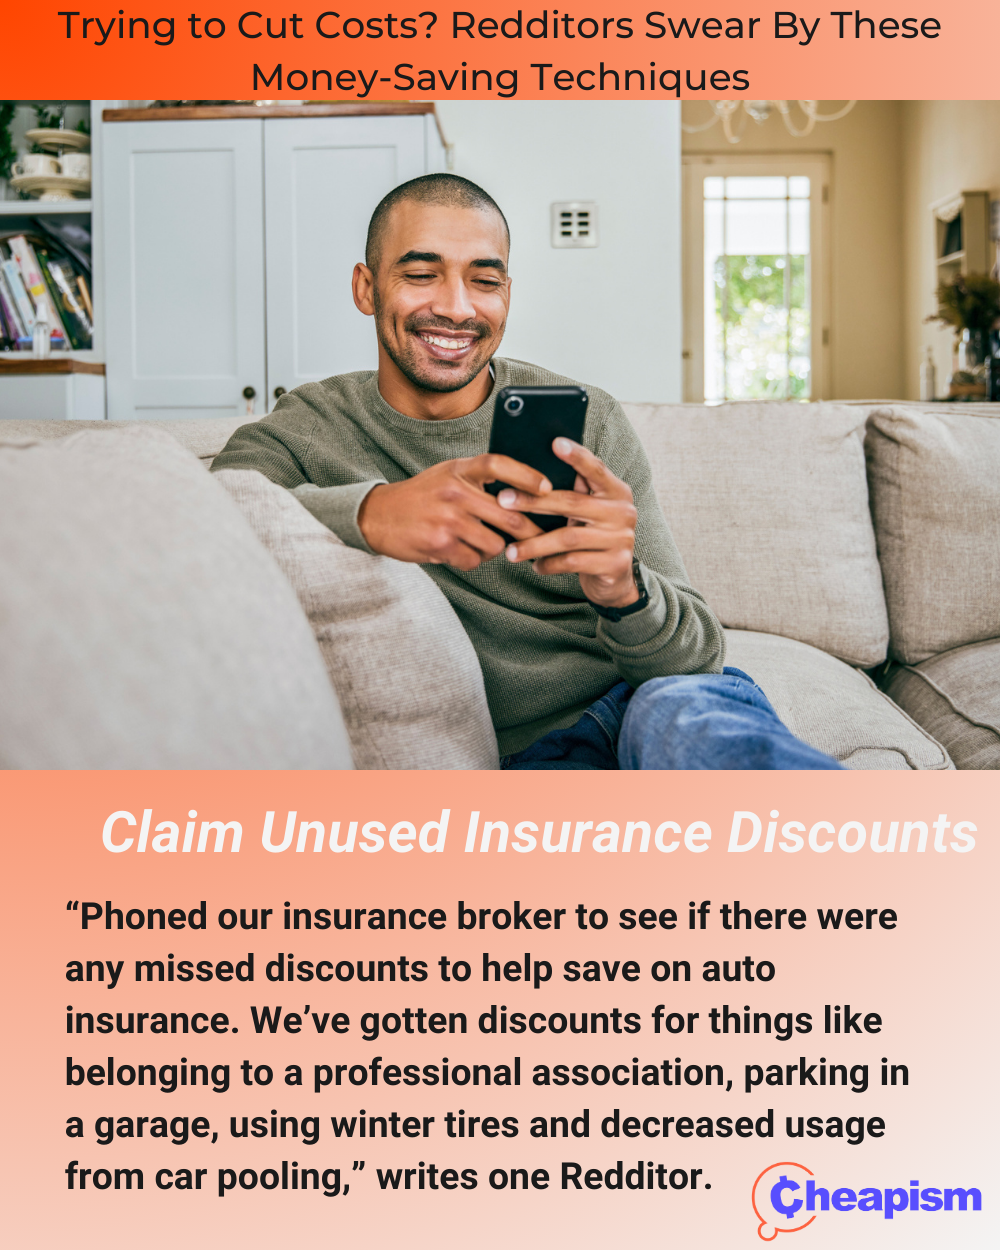 Reach Out to Your Insurance Broker About Potential Discounts